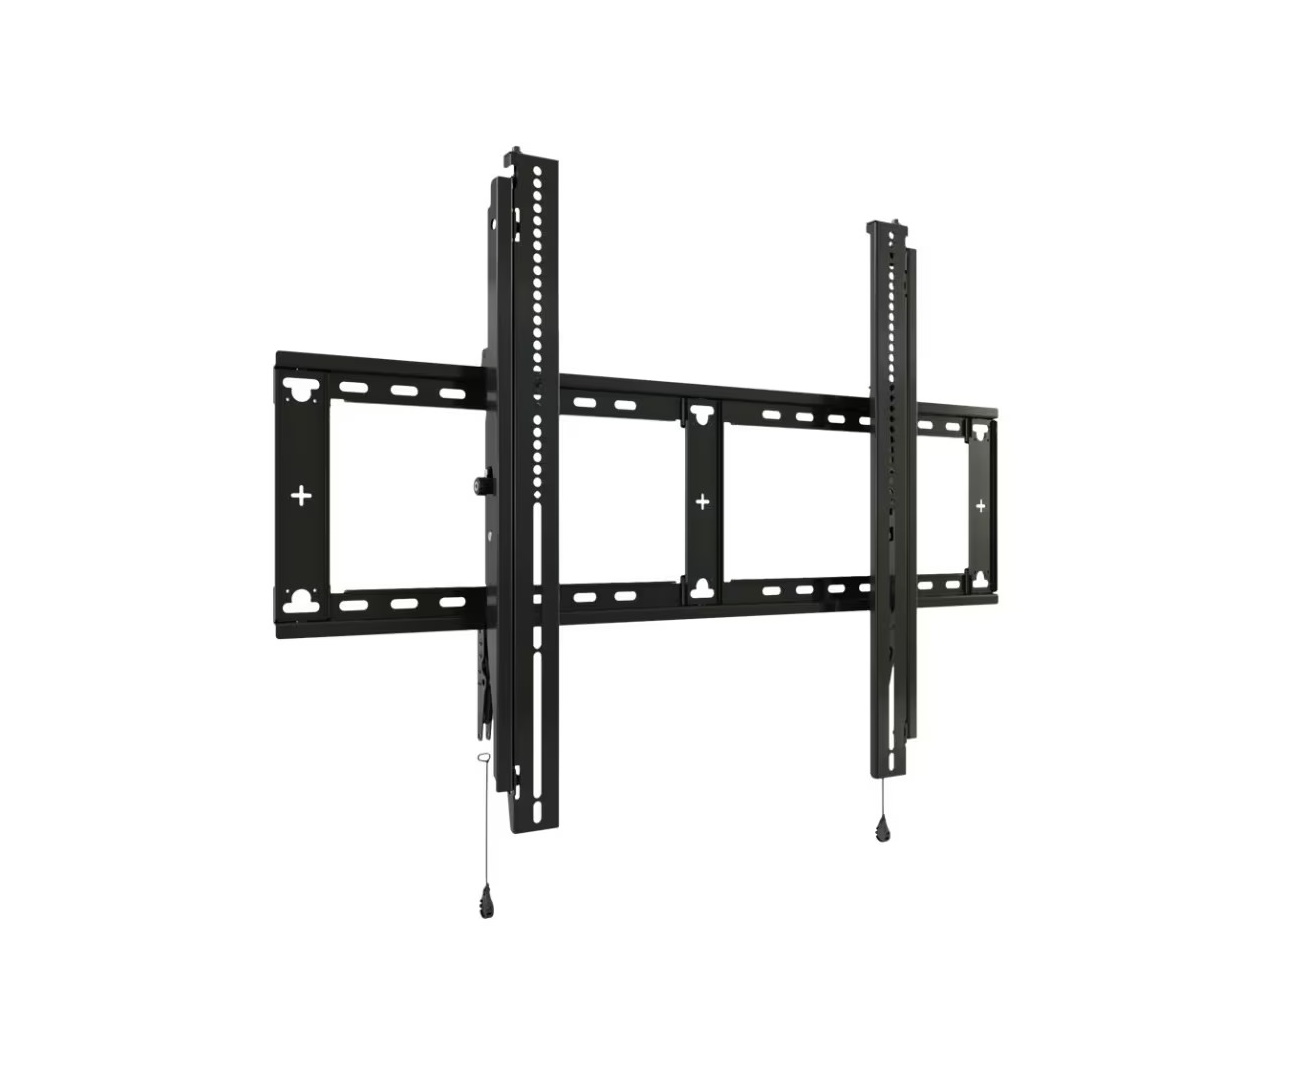 Chief Manufaturing Fit X-Large Tilt Display Wall Mount For 49-98 Displays Black RXT3